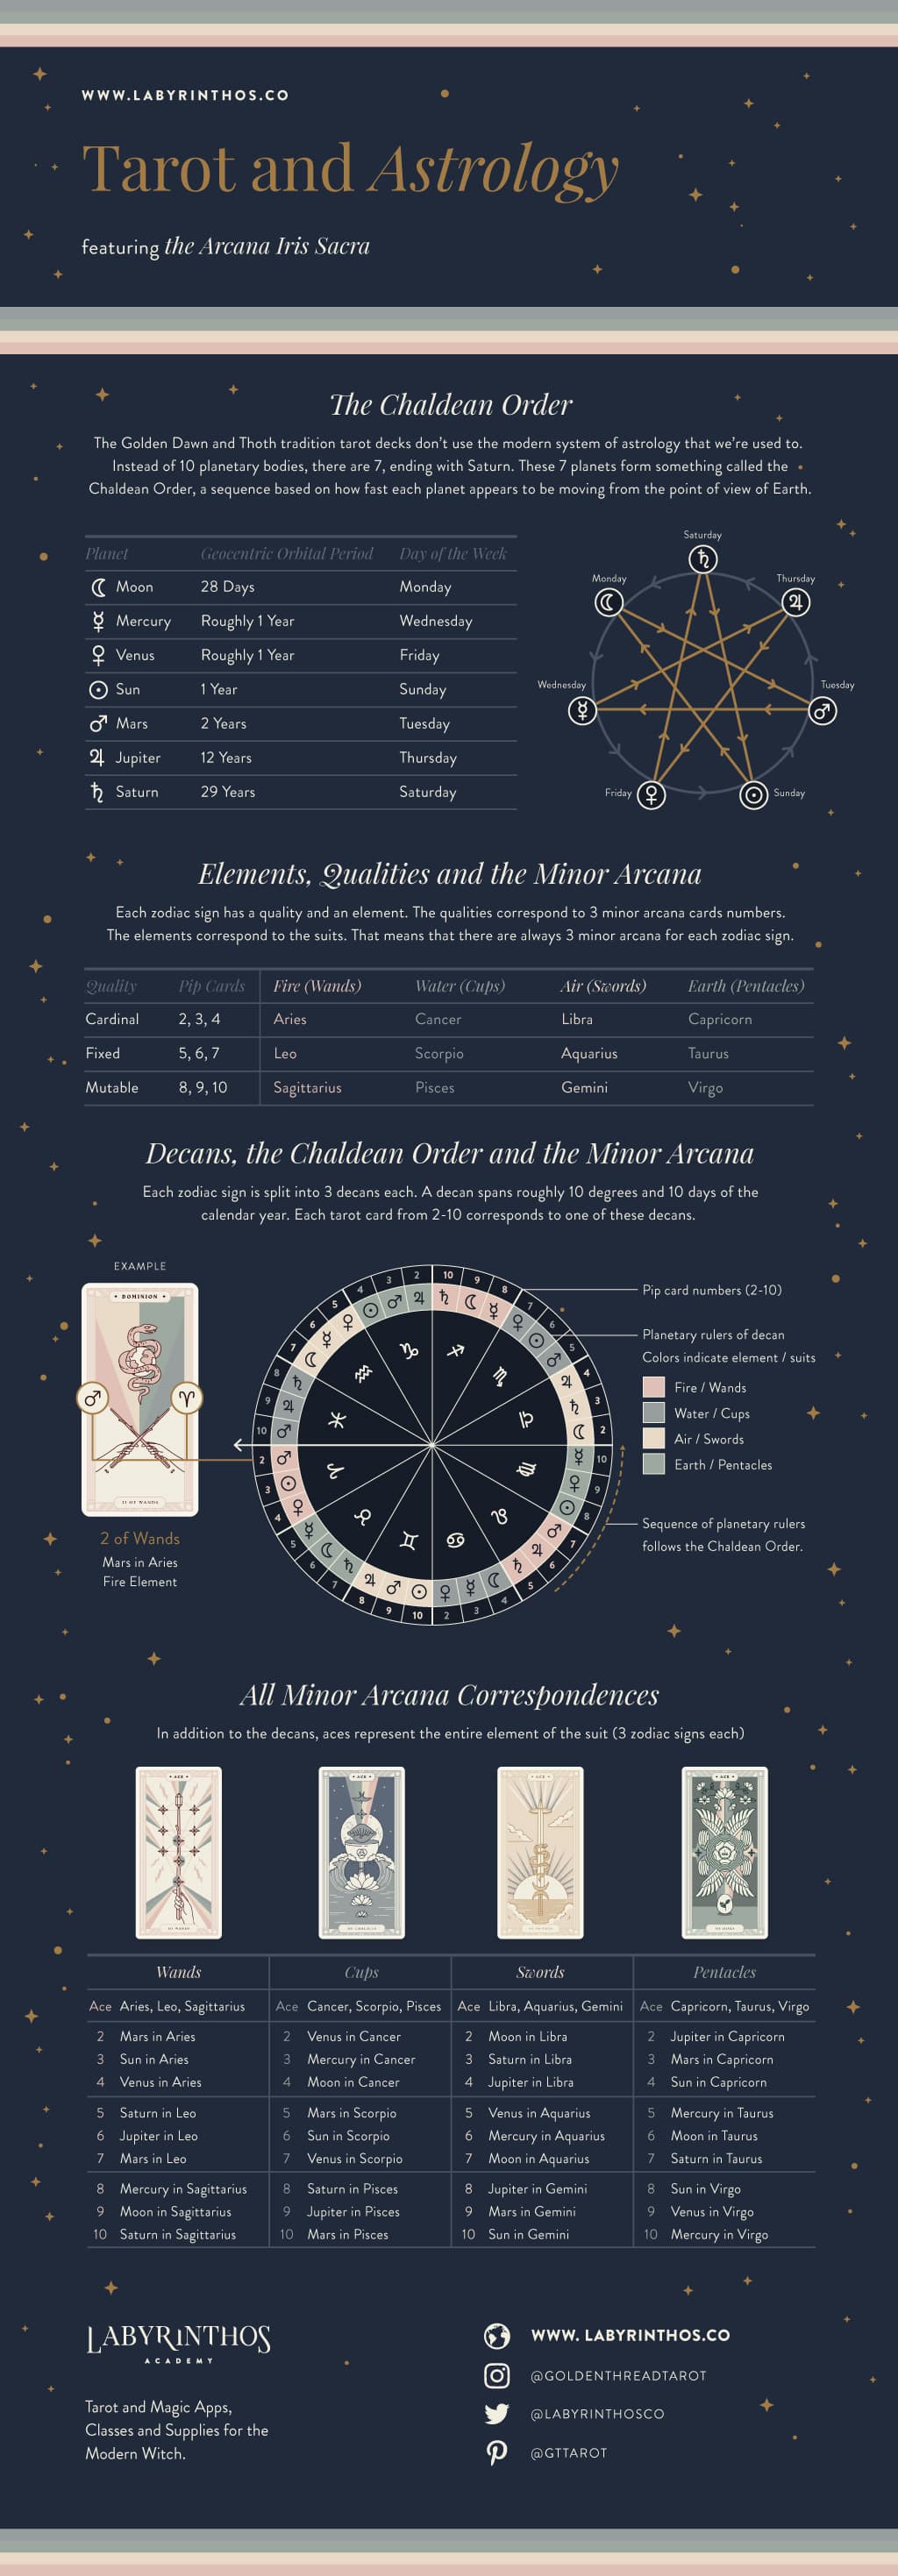 Tarot and Astrology: Full Infographic on pip card correspondences in the golden dawn tradition and thoth traditions